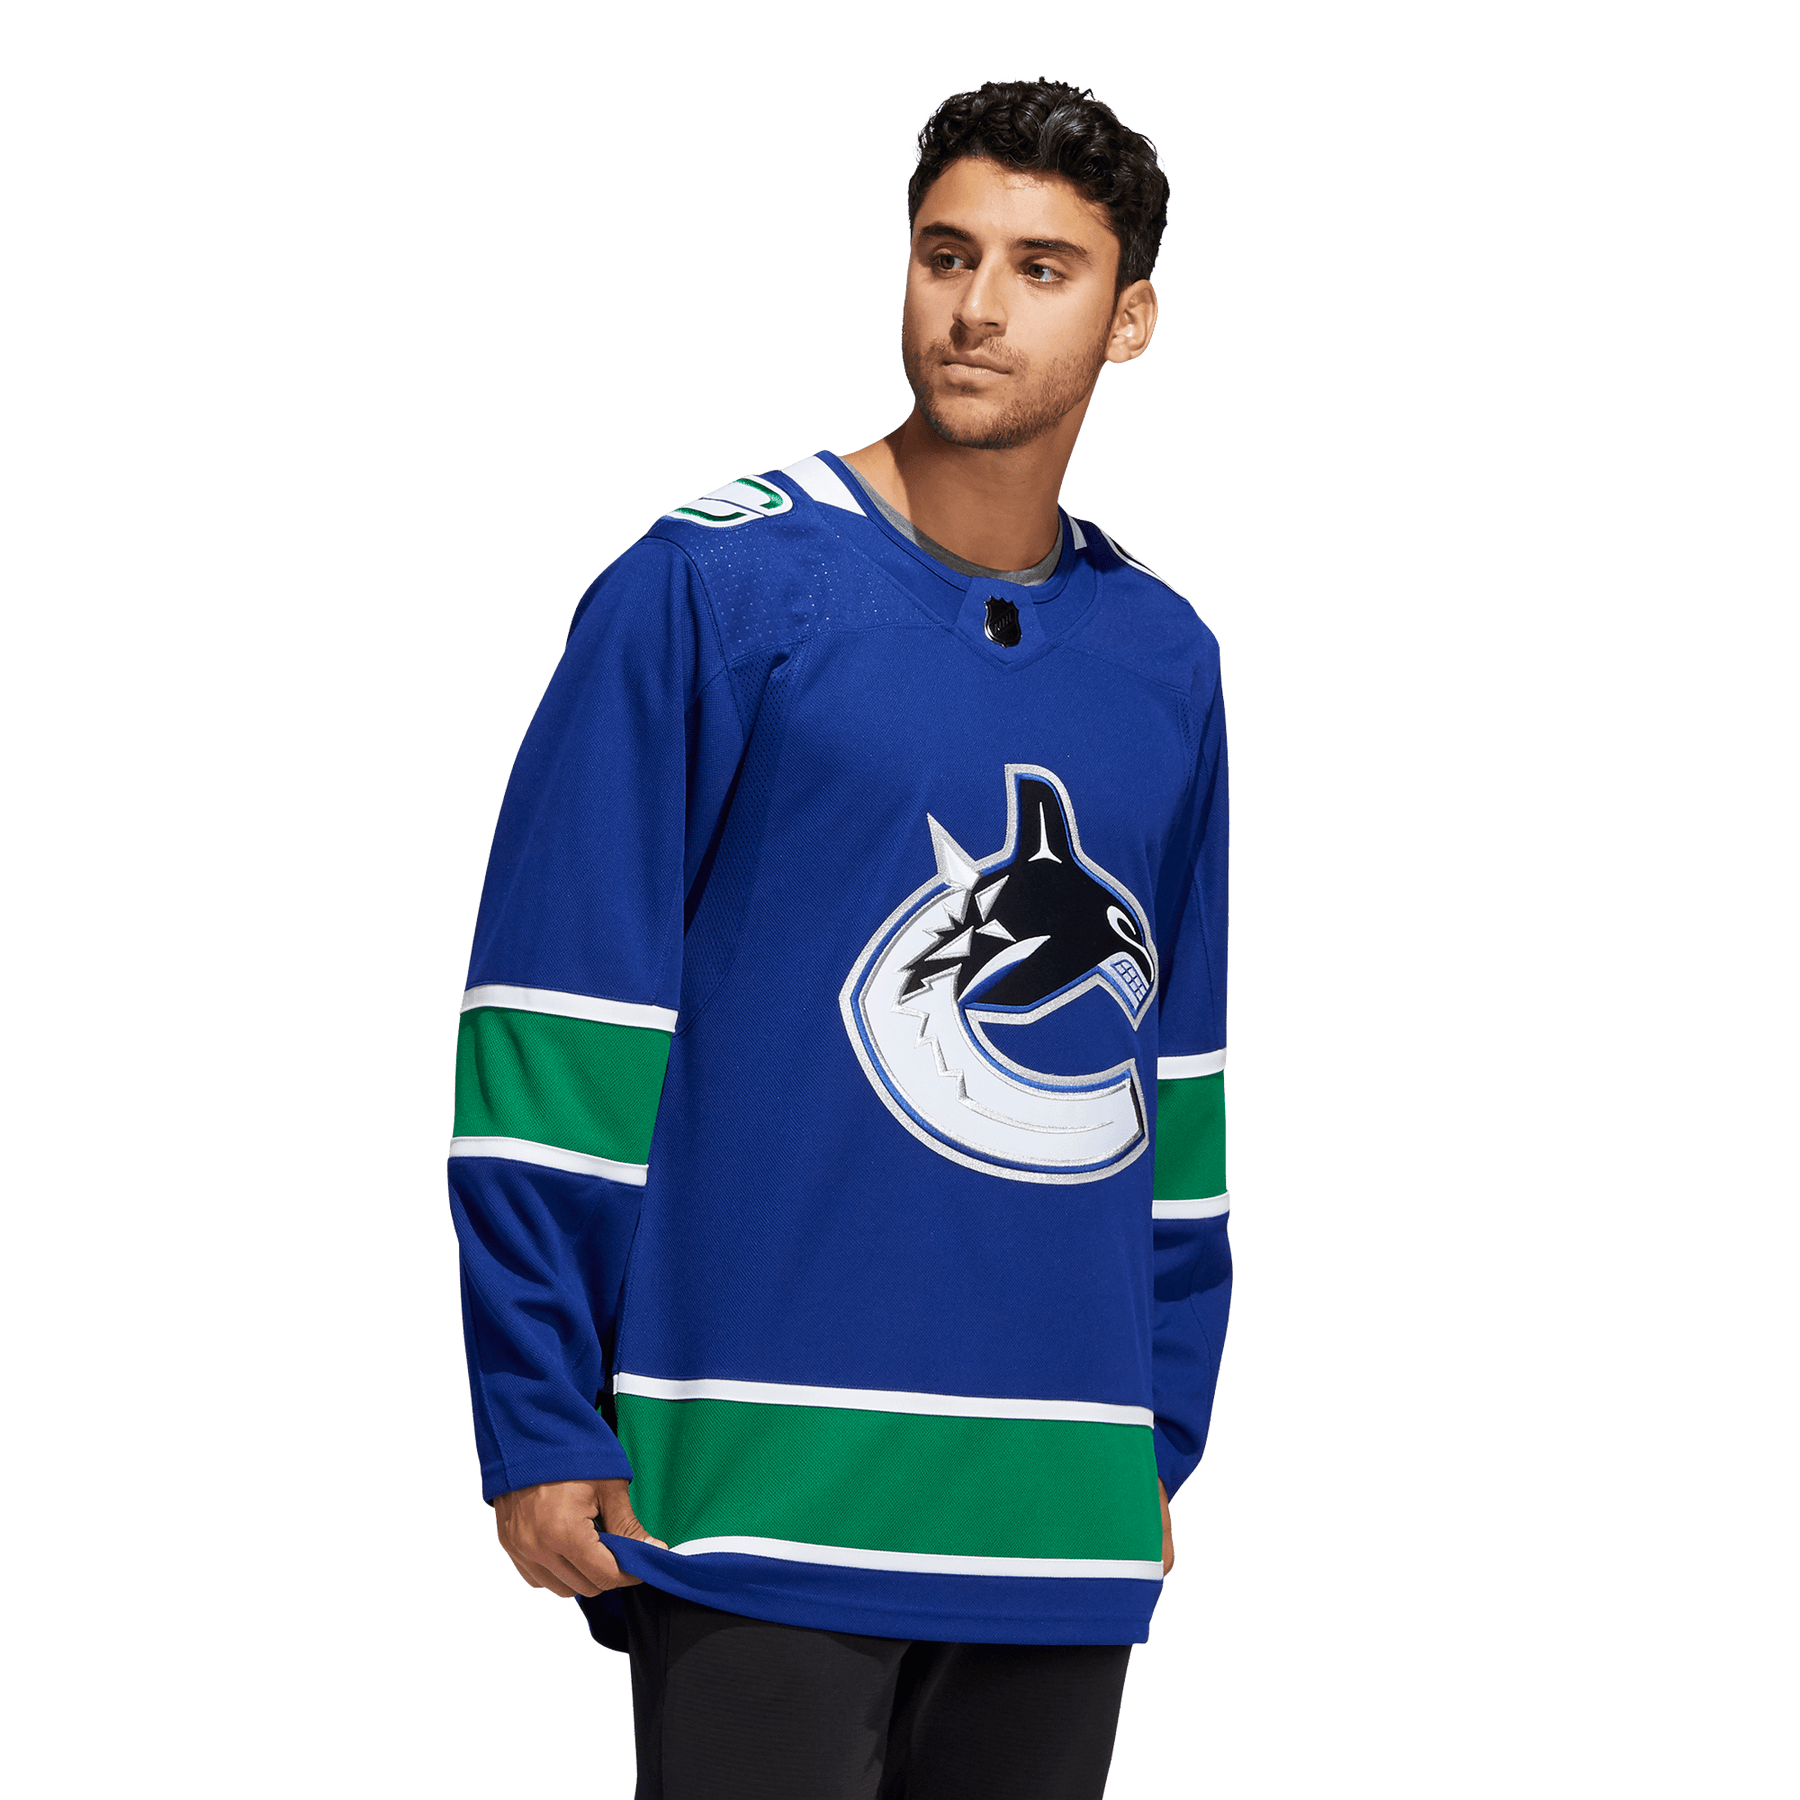 Vancouver Canucks - Introducing the all-new authentic ADIZERO Primegreen NHL  jersey. Made in part with recycled materials, this jersey is designed for  the players, fit for the fan, and formed for the